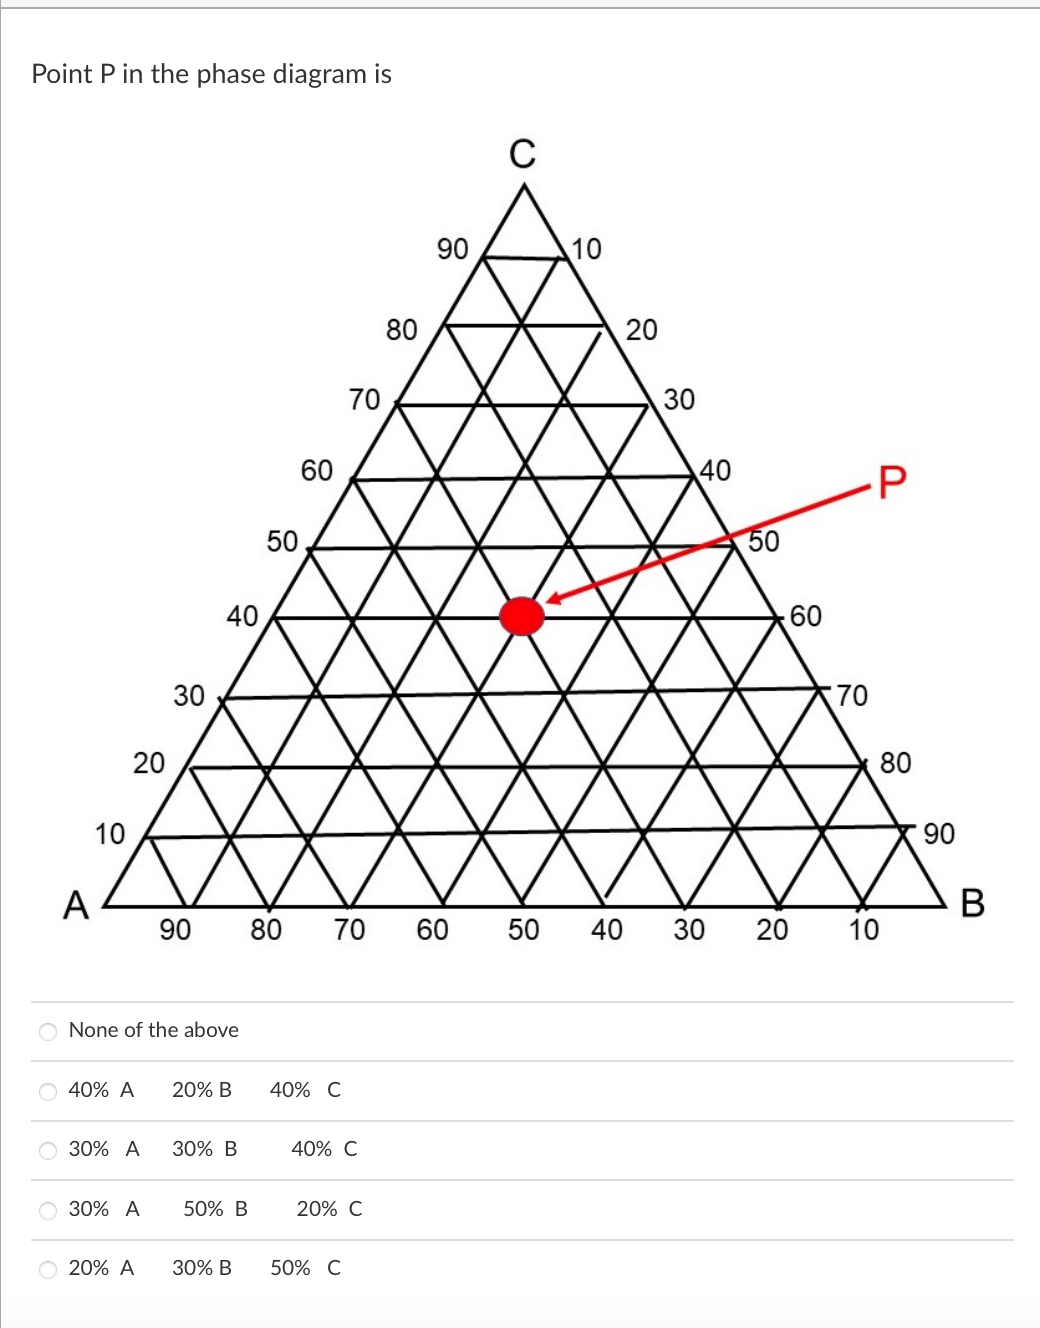 Point P in the phase diagram is
C
40
50
80
70
660
60
90
10
20
30
40
P
50
60
70
80
90
20
B
10
30
20
10
A
90
80
70 60
50
40
30
20
None of the above
40% A
20% B
40% C
30% A 30% B
40% C
30% A
50% B
20% C
20% A
30% B
50% C